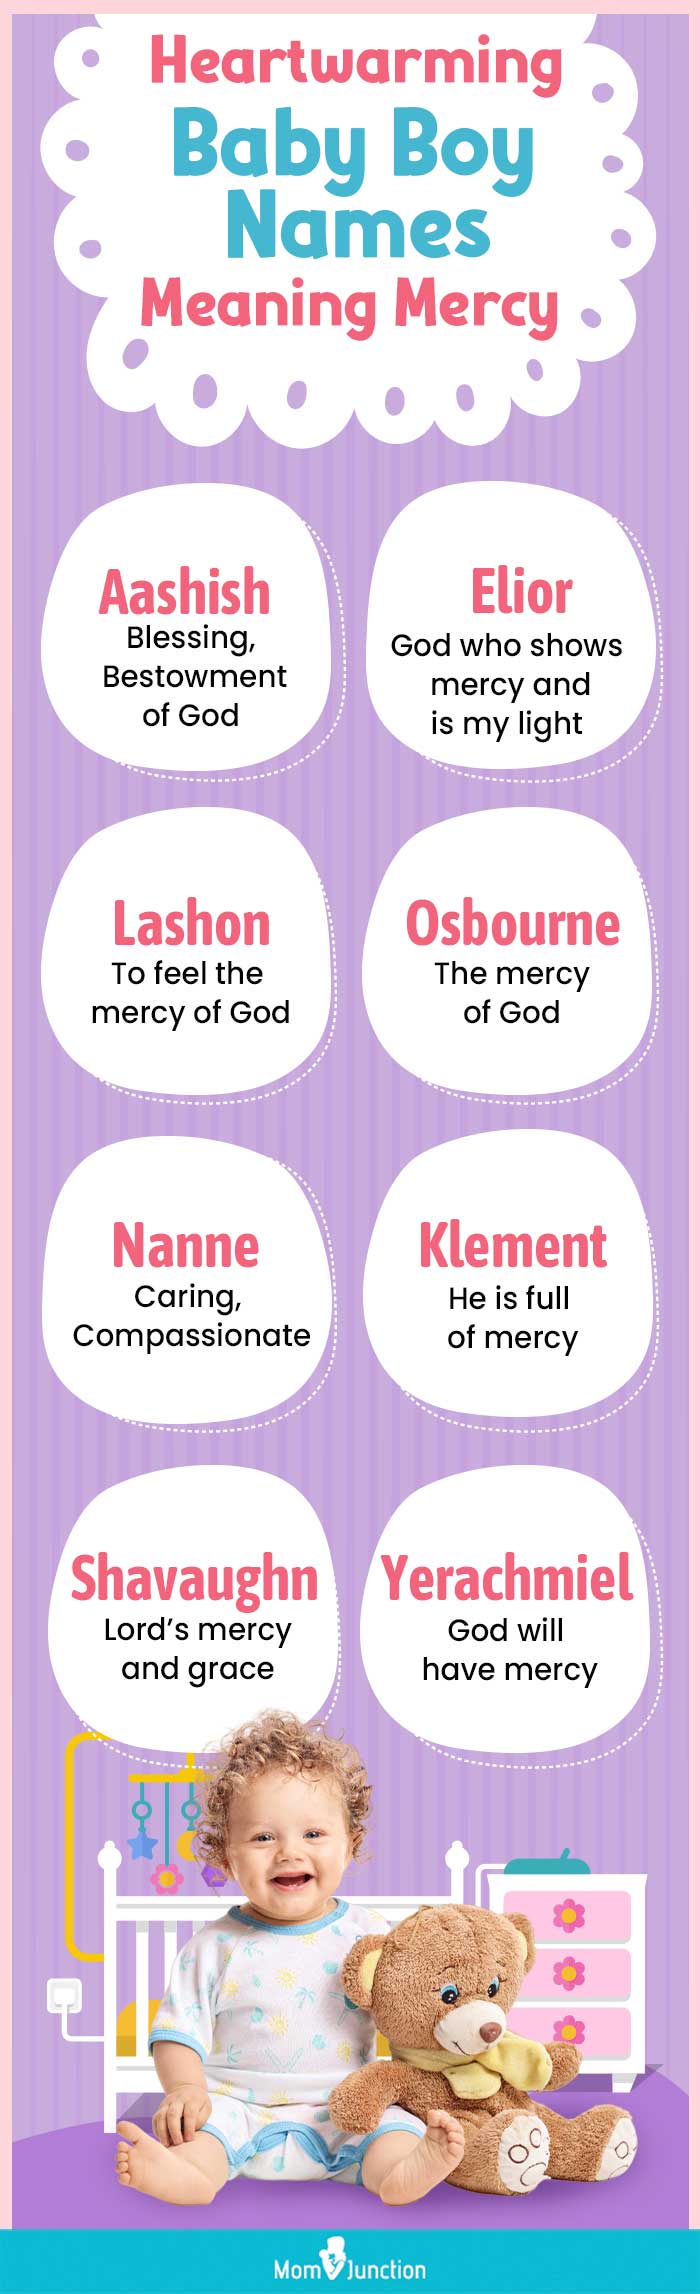 heartwarming baby boy names meaning mercy (infographic)